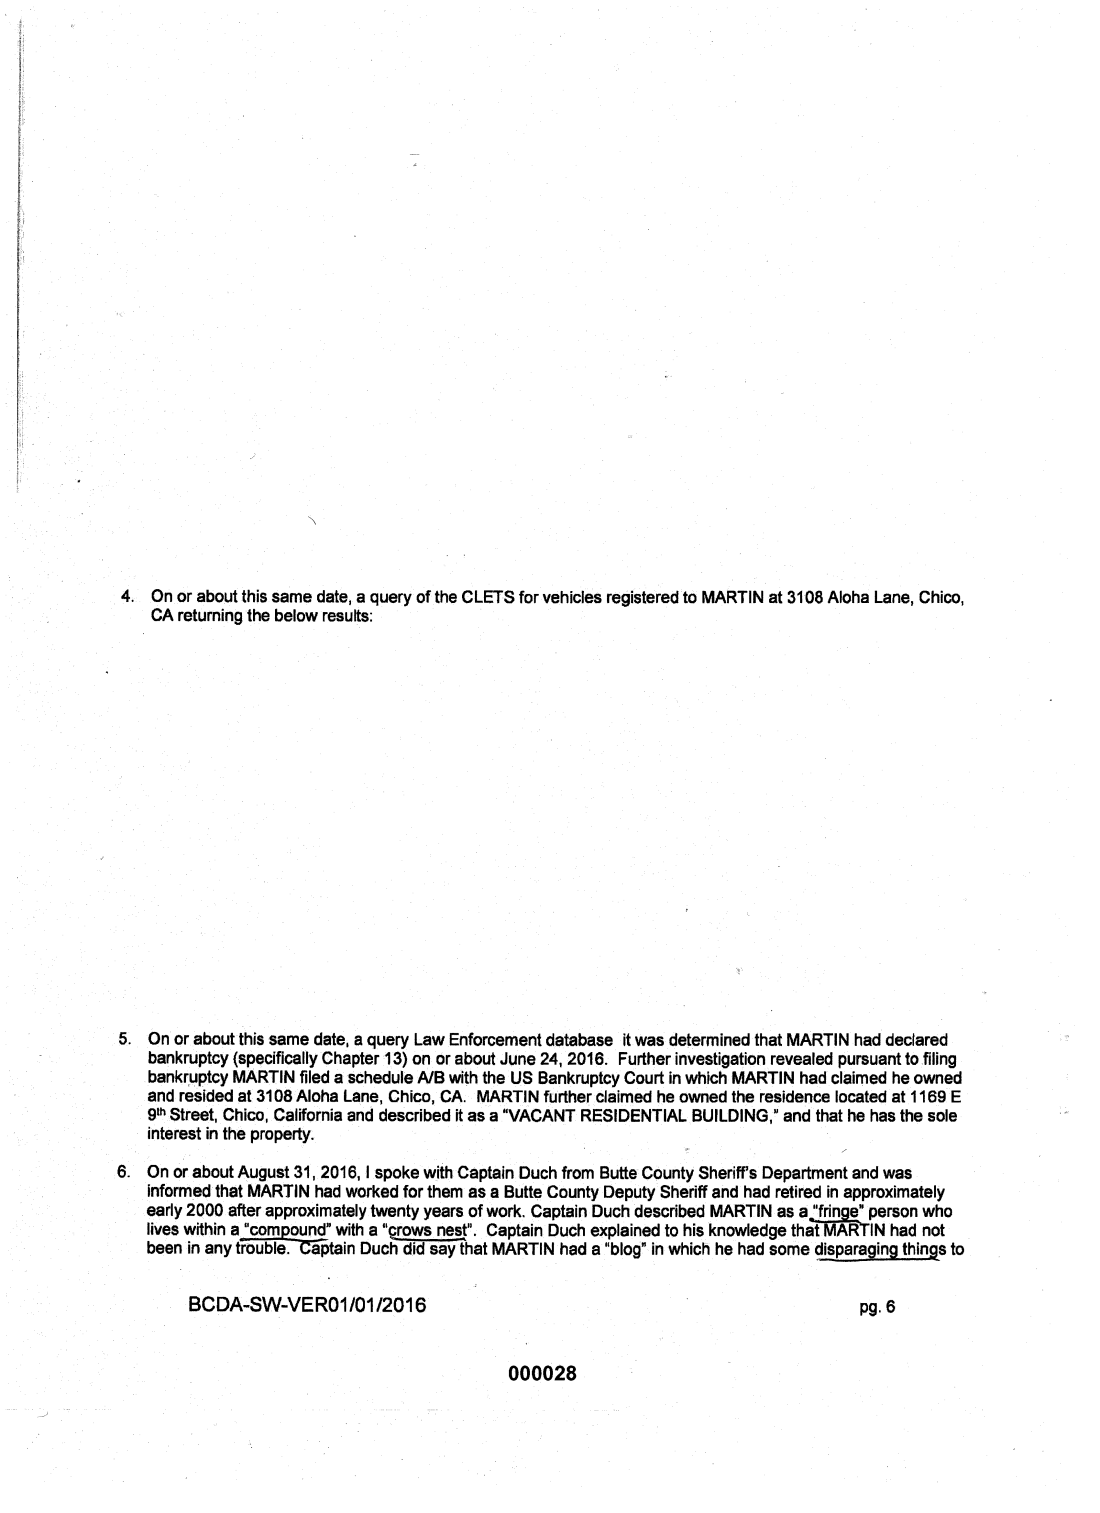 Statement of probable cause page 2